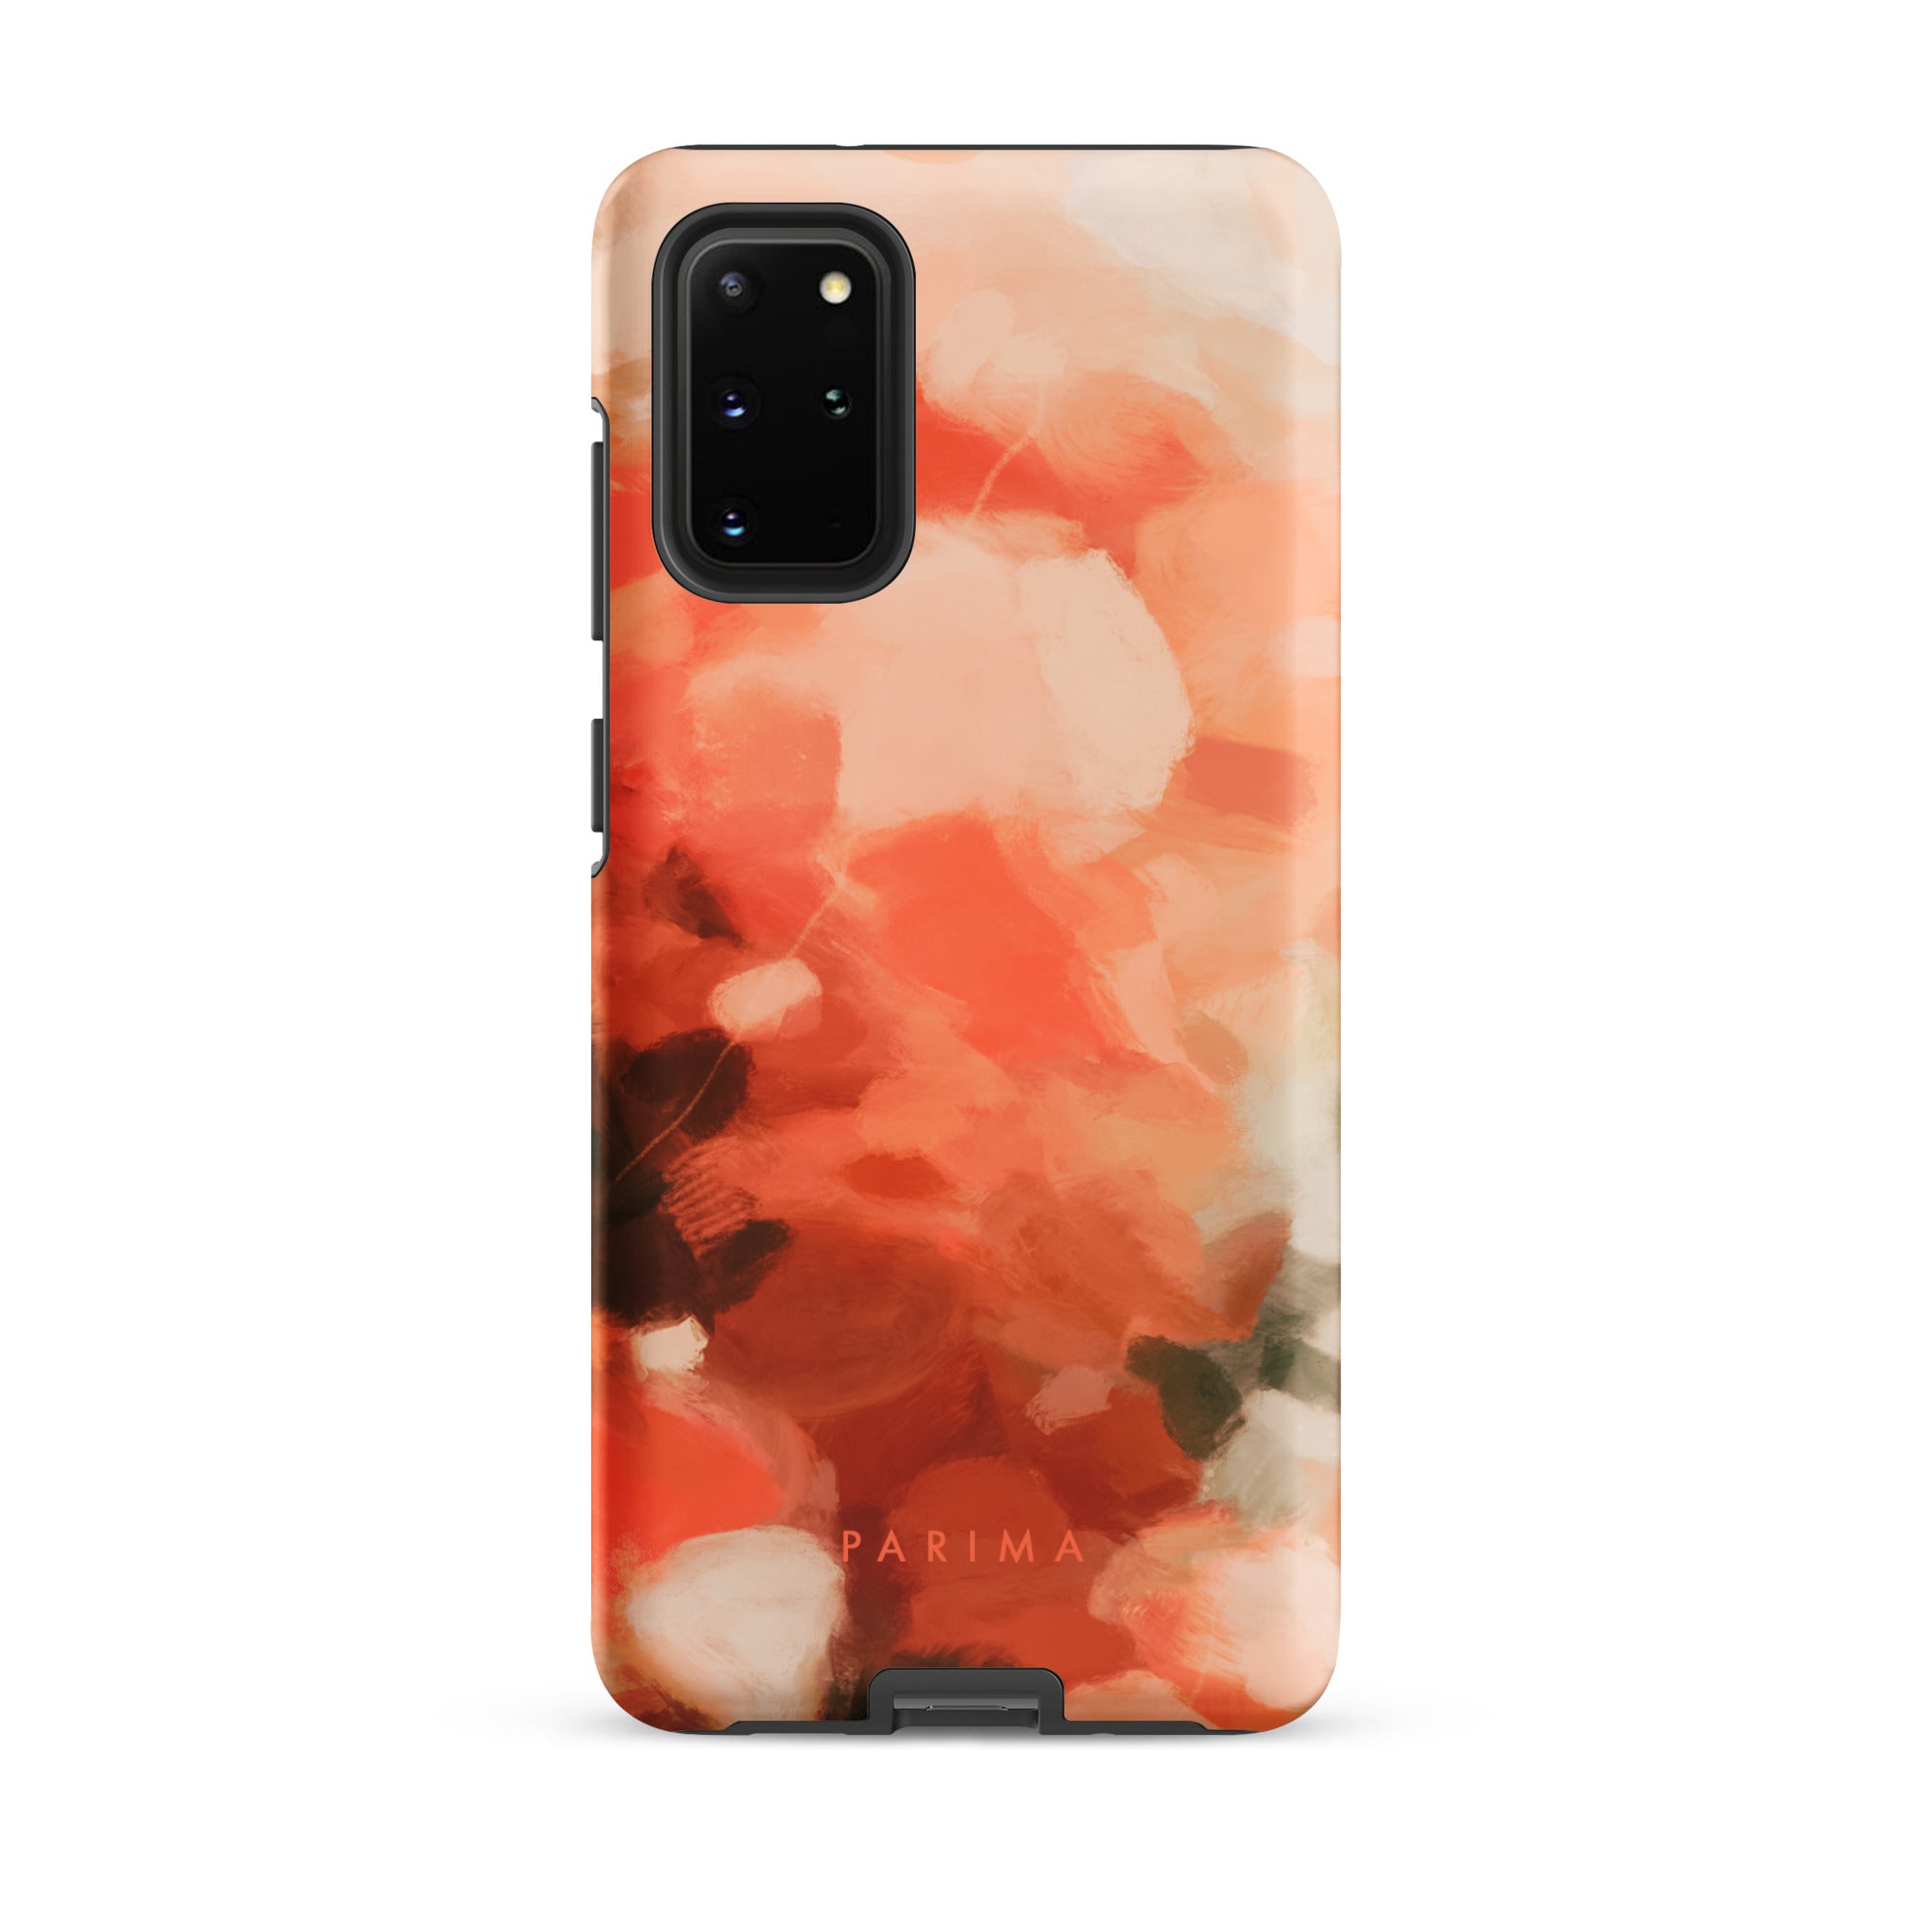 Sweet Nectar, orange and pink abstract art on Samsung Galaxy S20 Plus tough case by Parima Studio